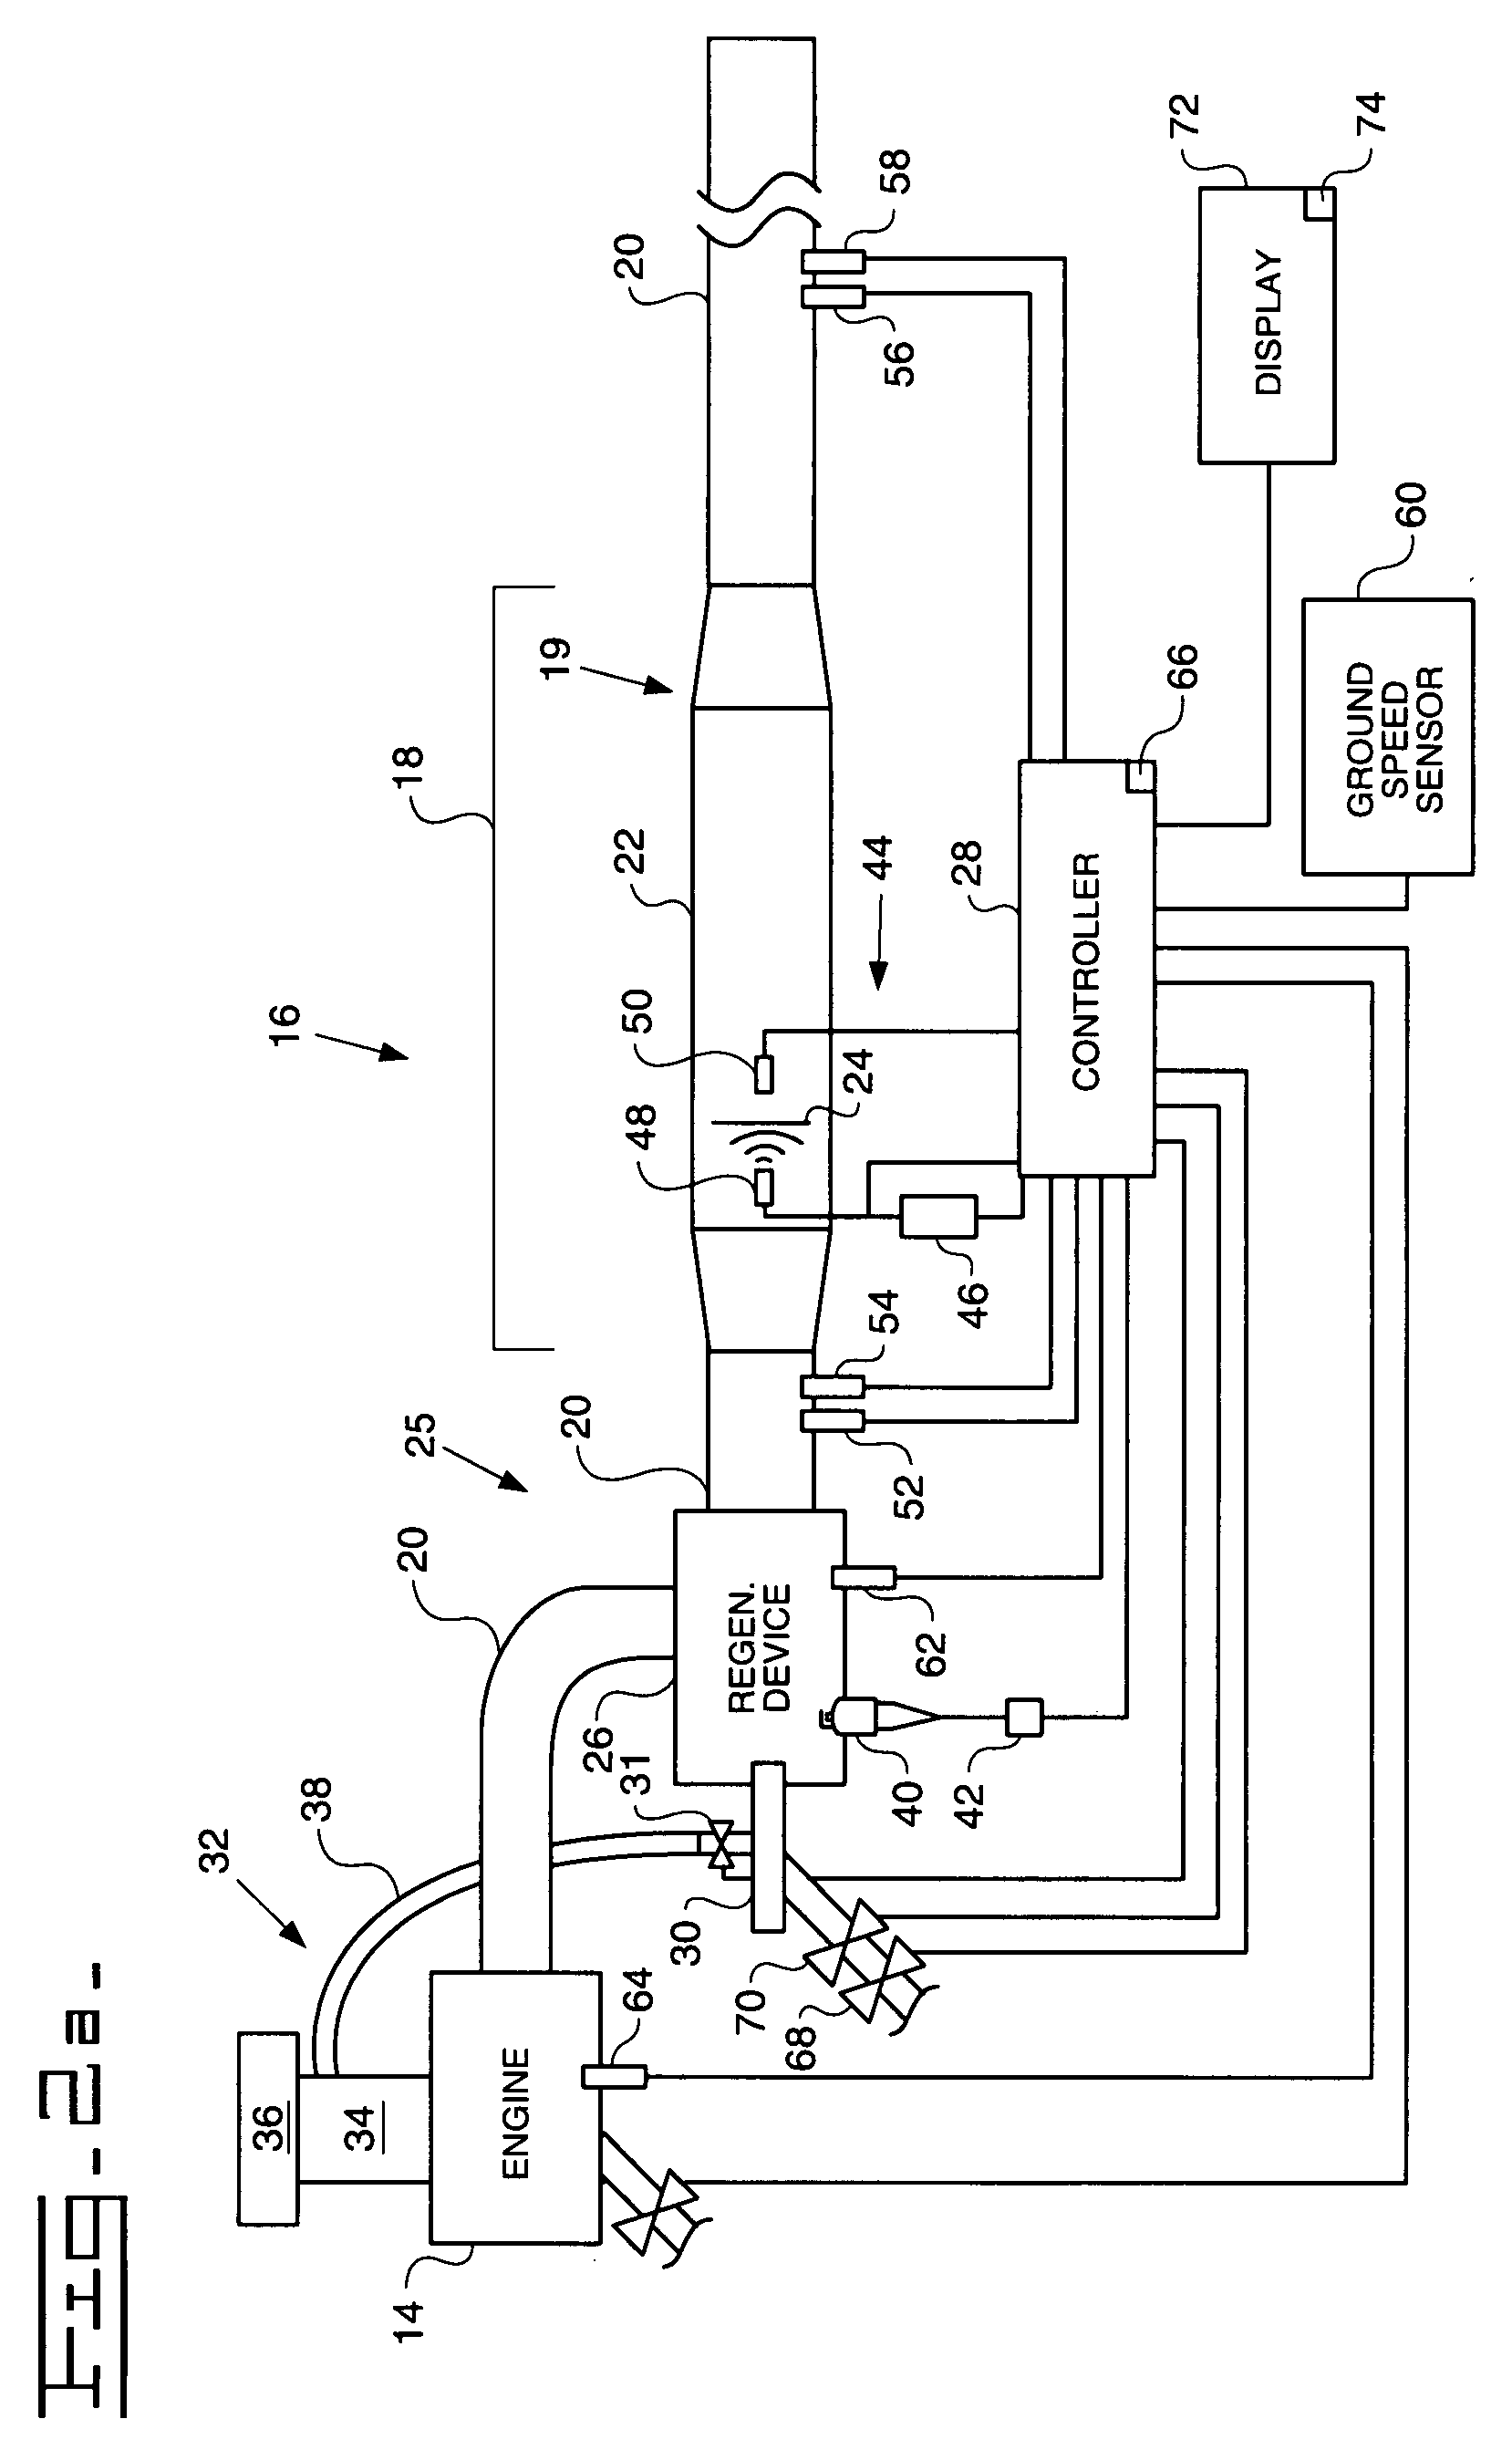 Particulate loading monitoring system